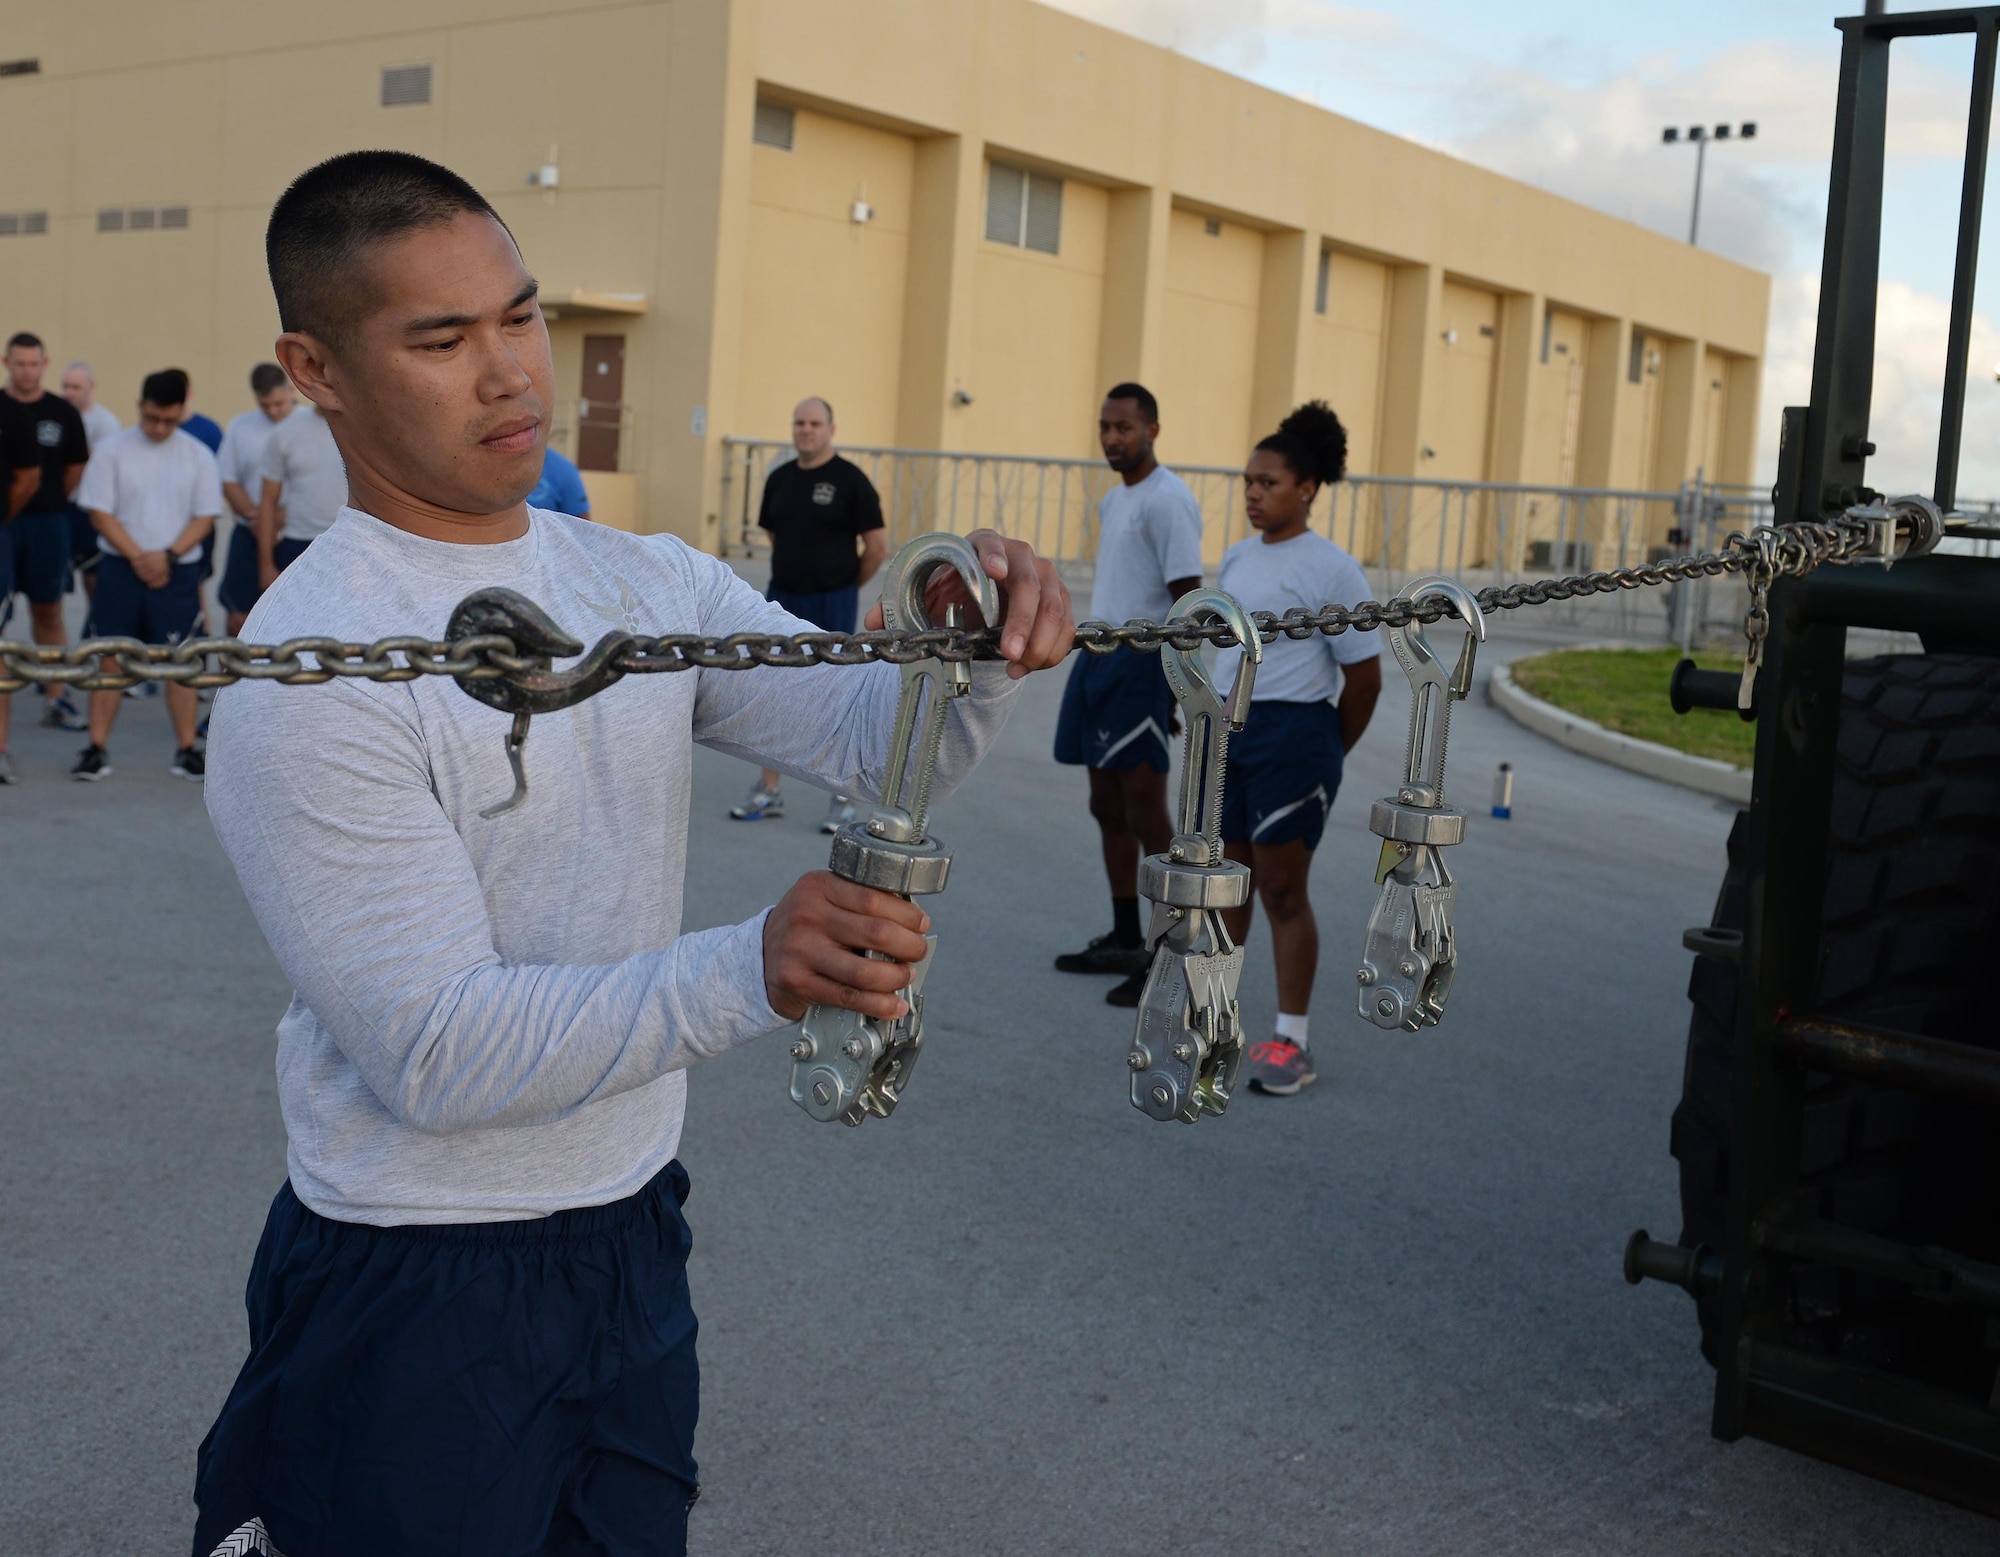 An Airman attaches an MB-1 device onto a chain during the Port Dawg’s memorial May 19, 2017, at Andersen Air Force Base, Guam. The MB-1 device symbolizes one of the five aerial transportation specialists that passed away across the Air Force within the last year. (U.S. Air Force photo by Senior Airman Alexa Ann Henderson)